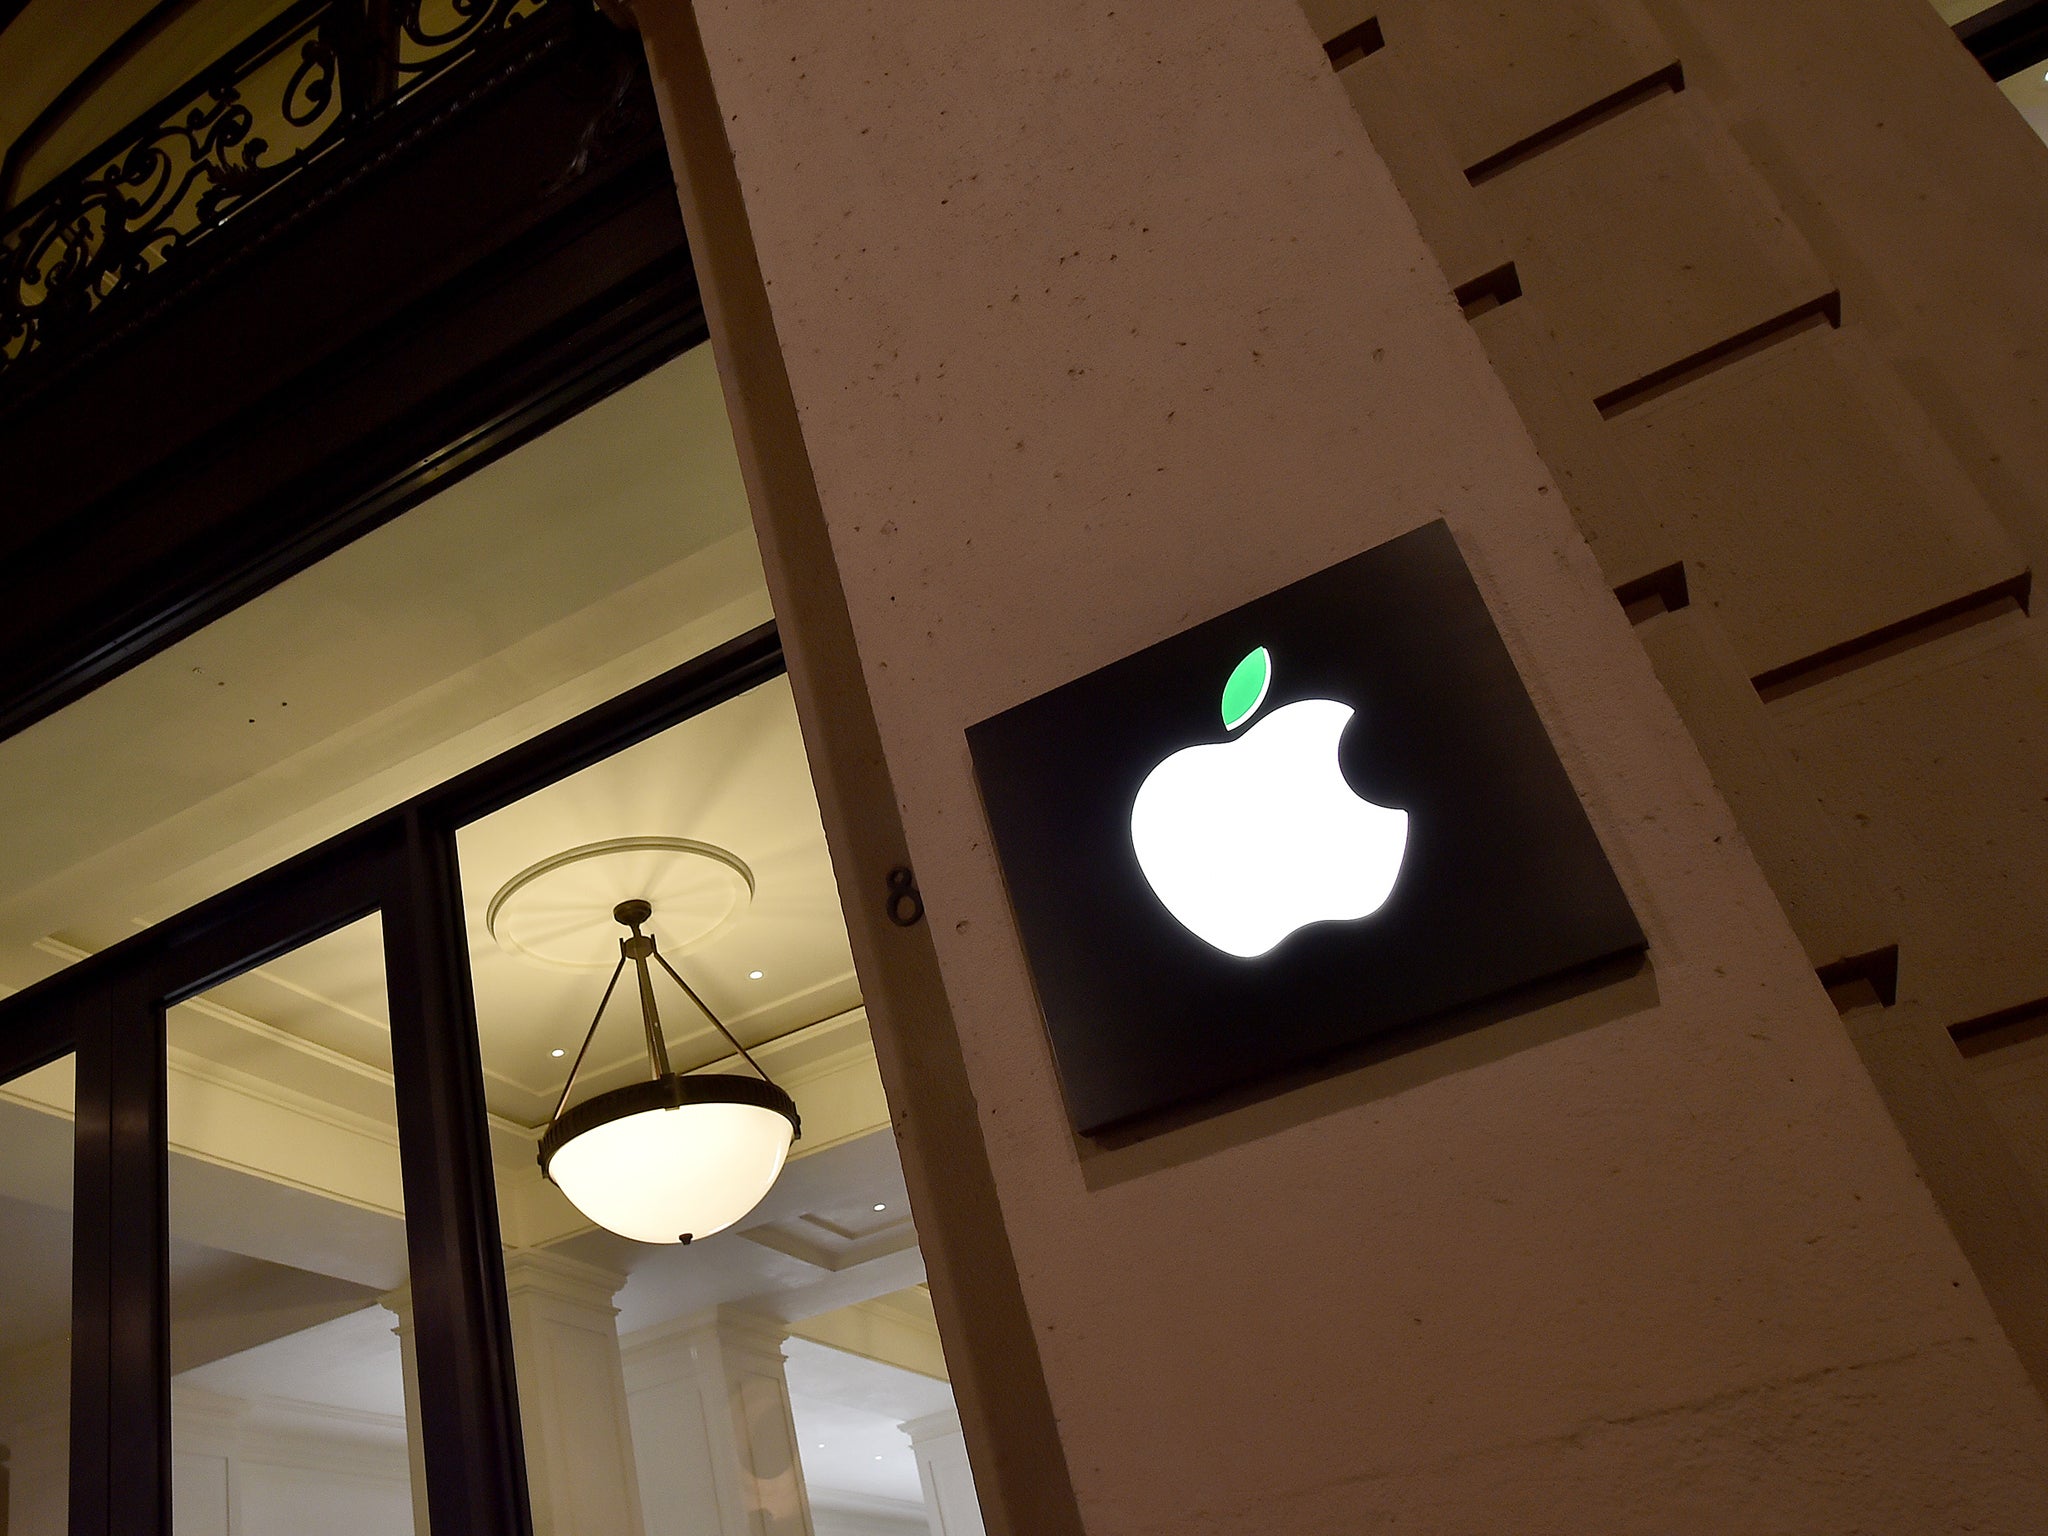 Apple appealed the ruling but the Glostrup District Court sided with Mr Lysgaard